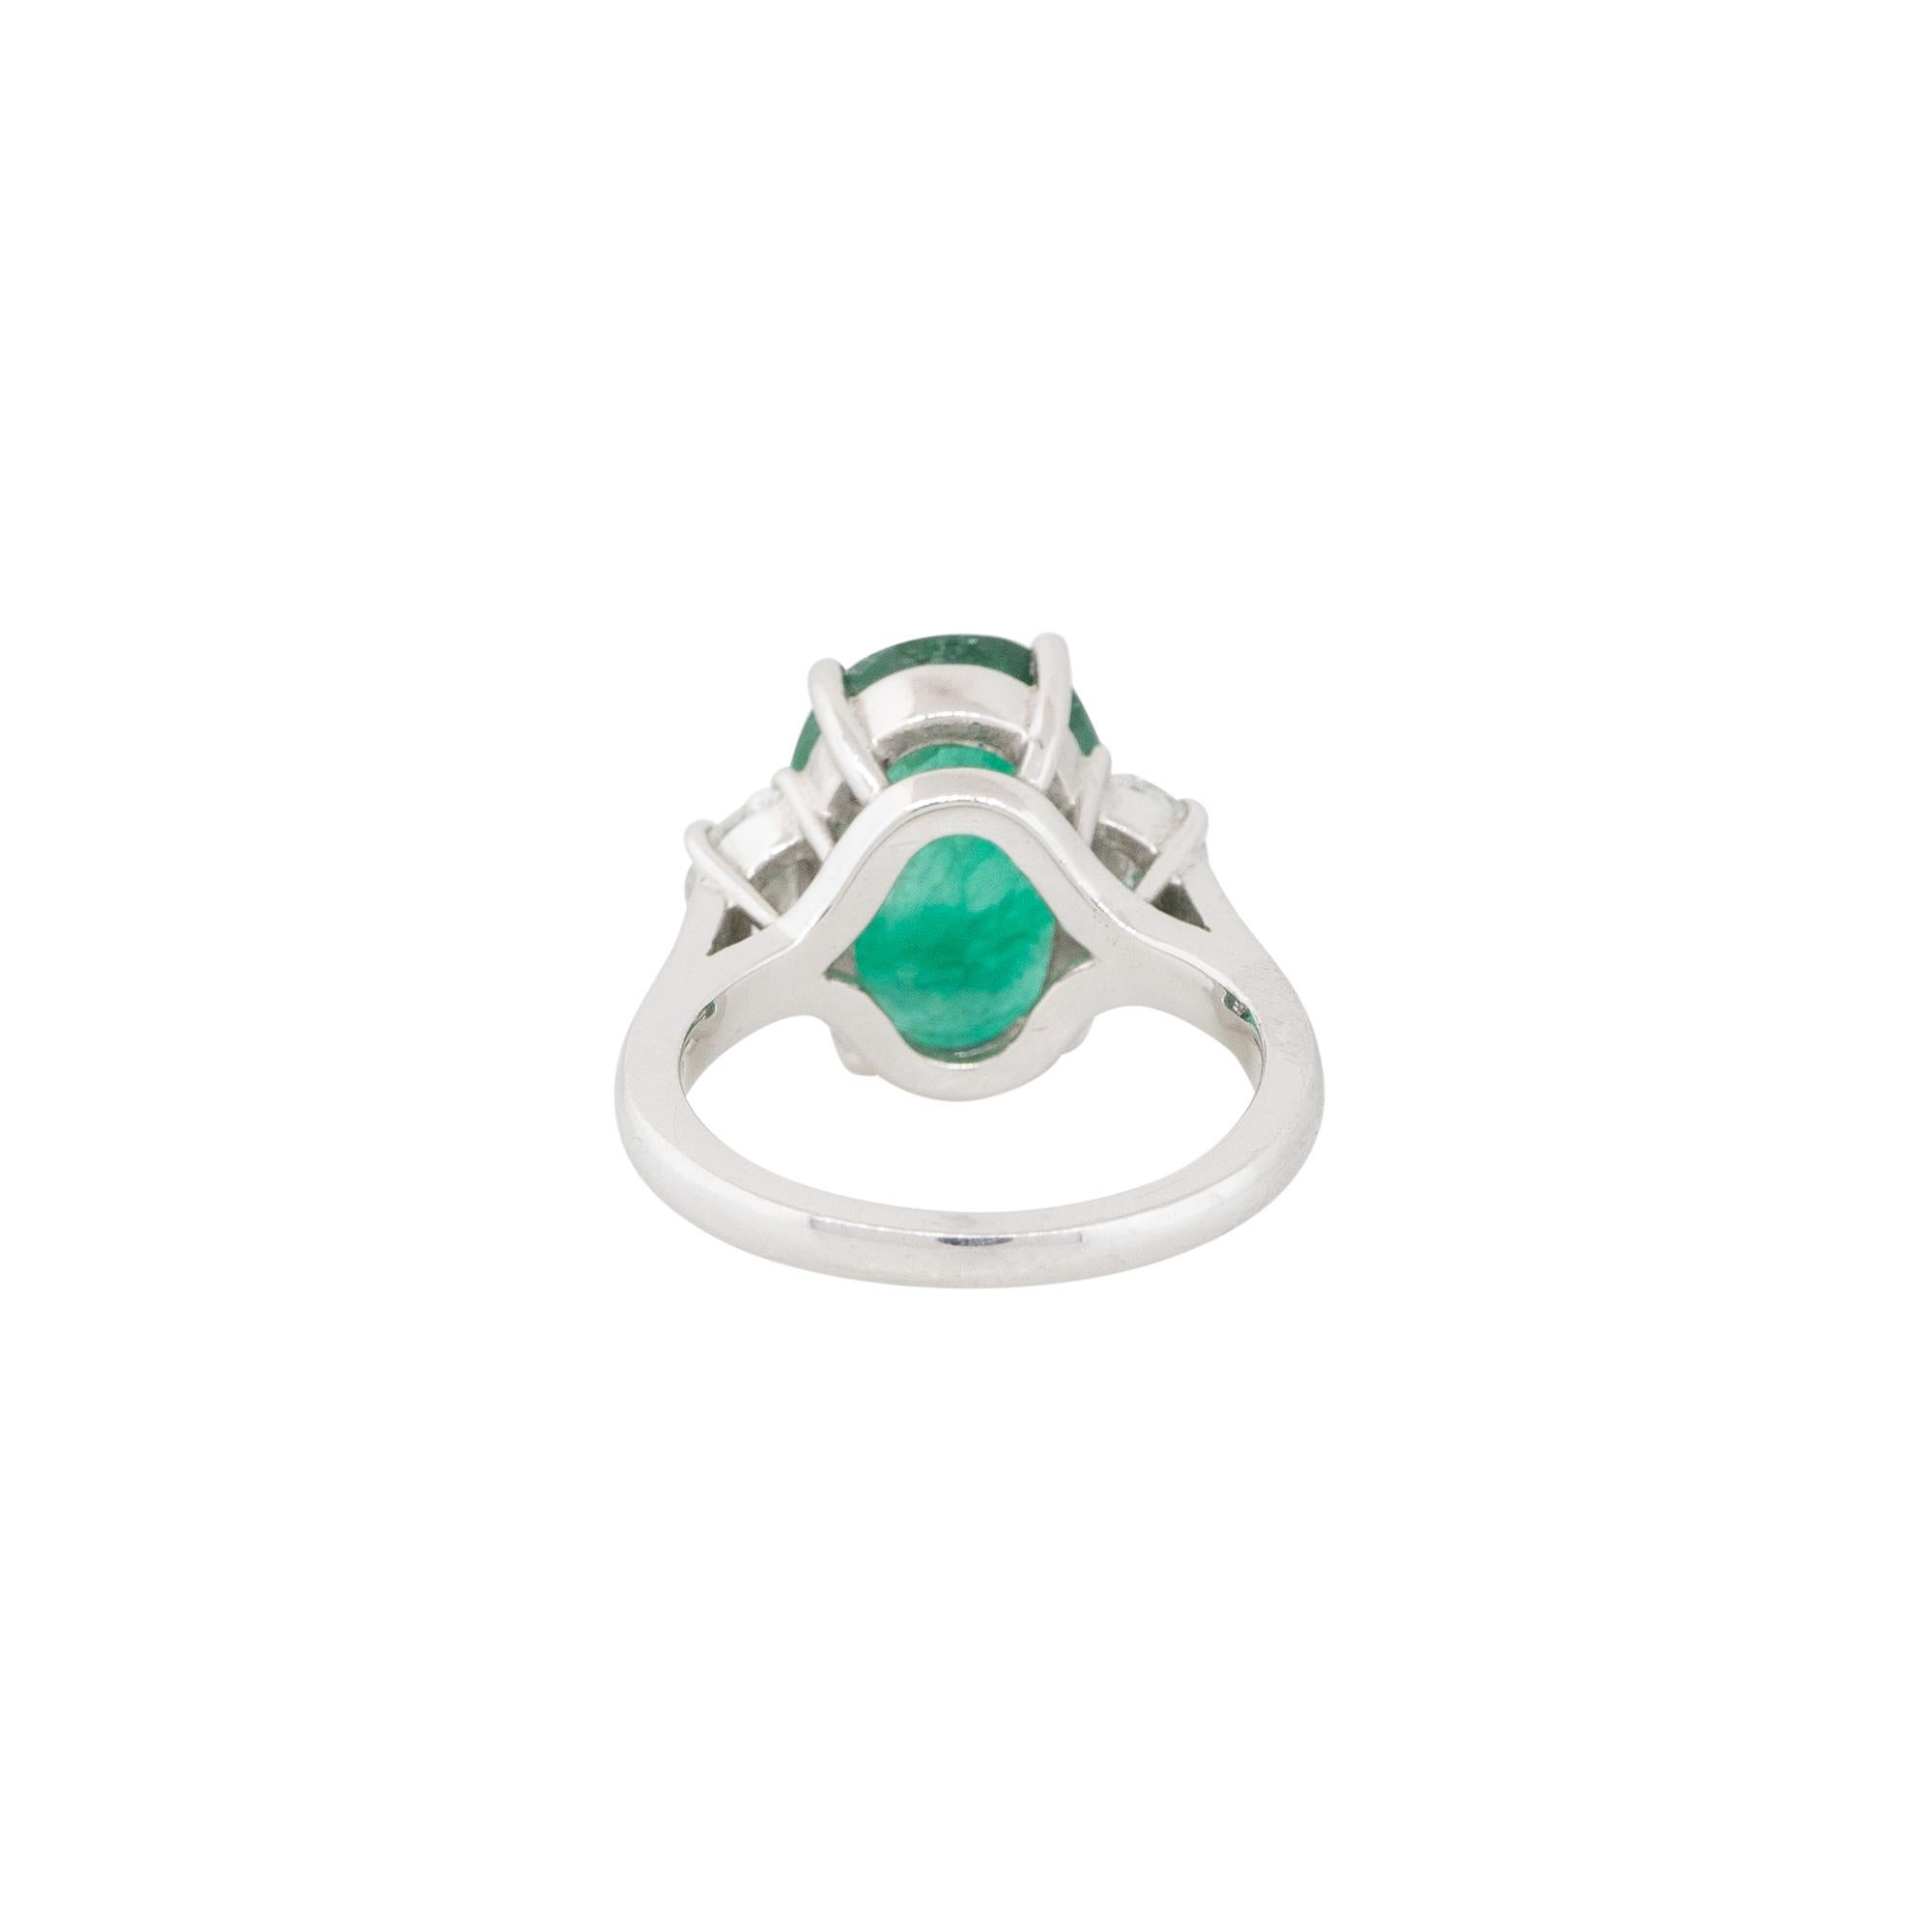 Oval Cut 5.86 Carat Emerald and Half Moon Diamond Side Stones Ring Platinum In Stock For Sale